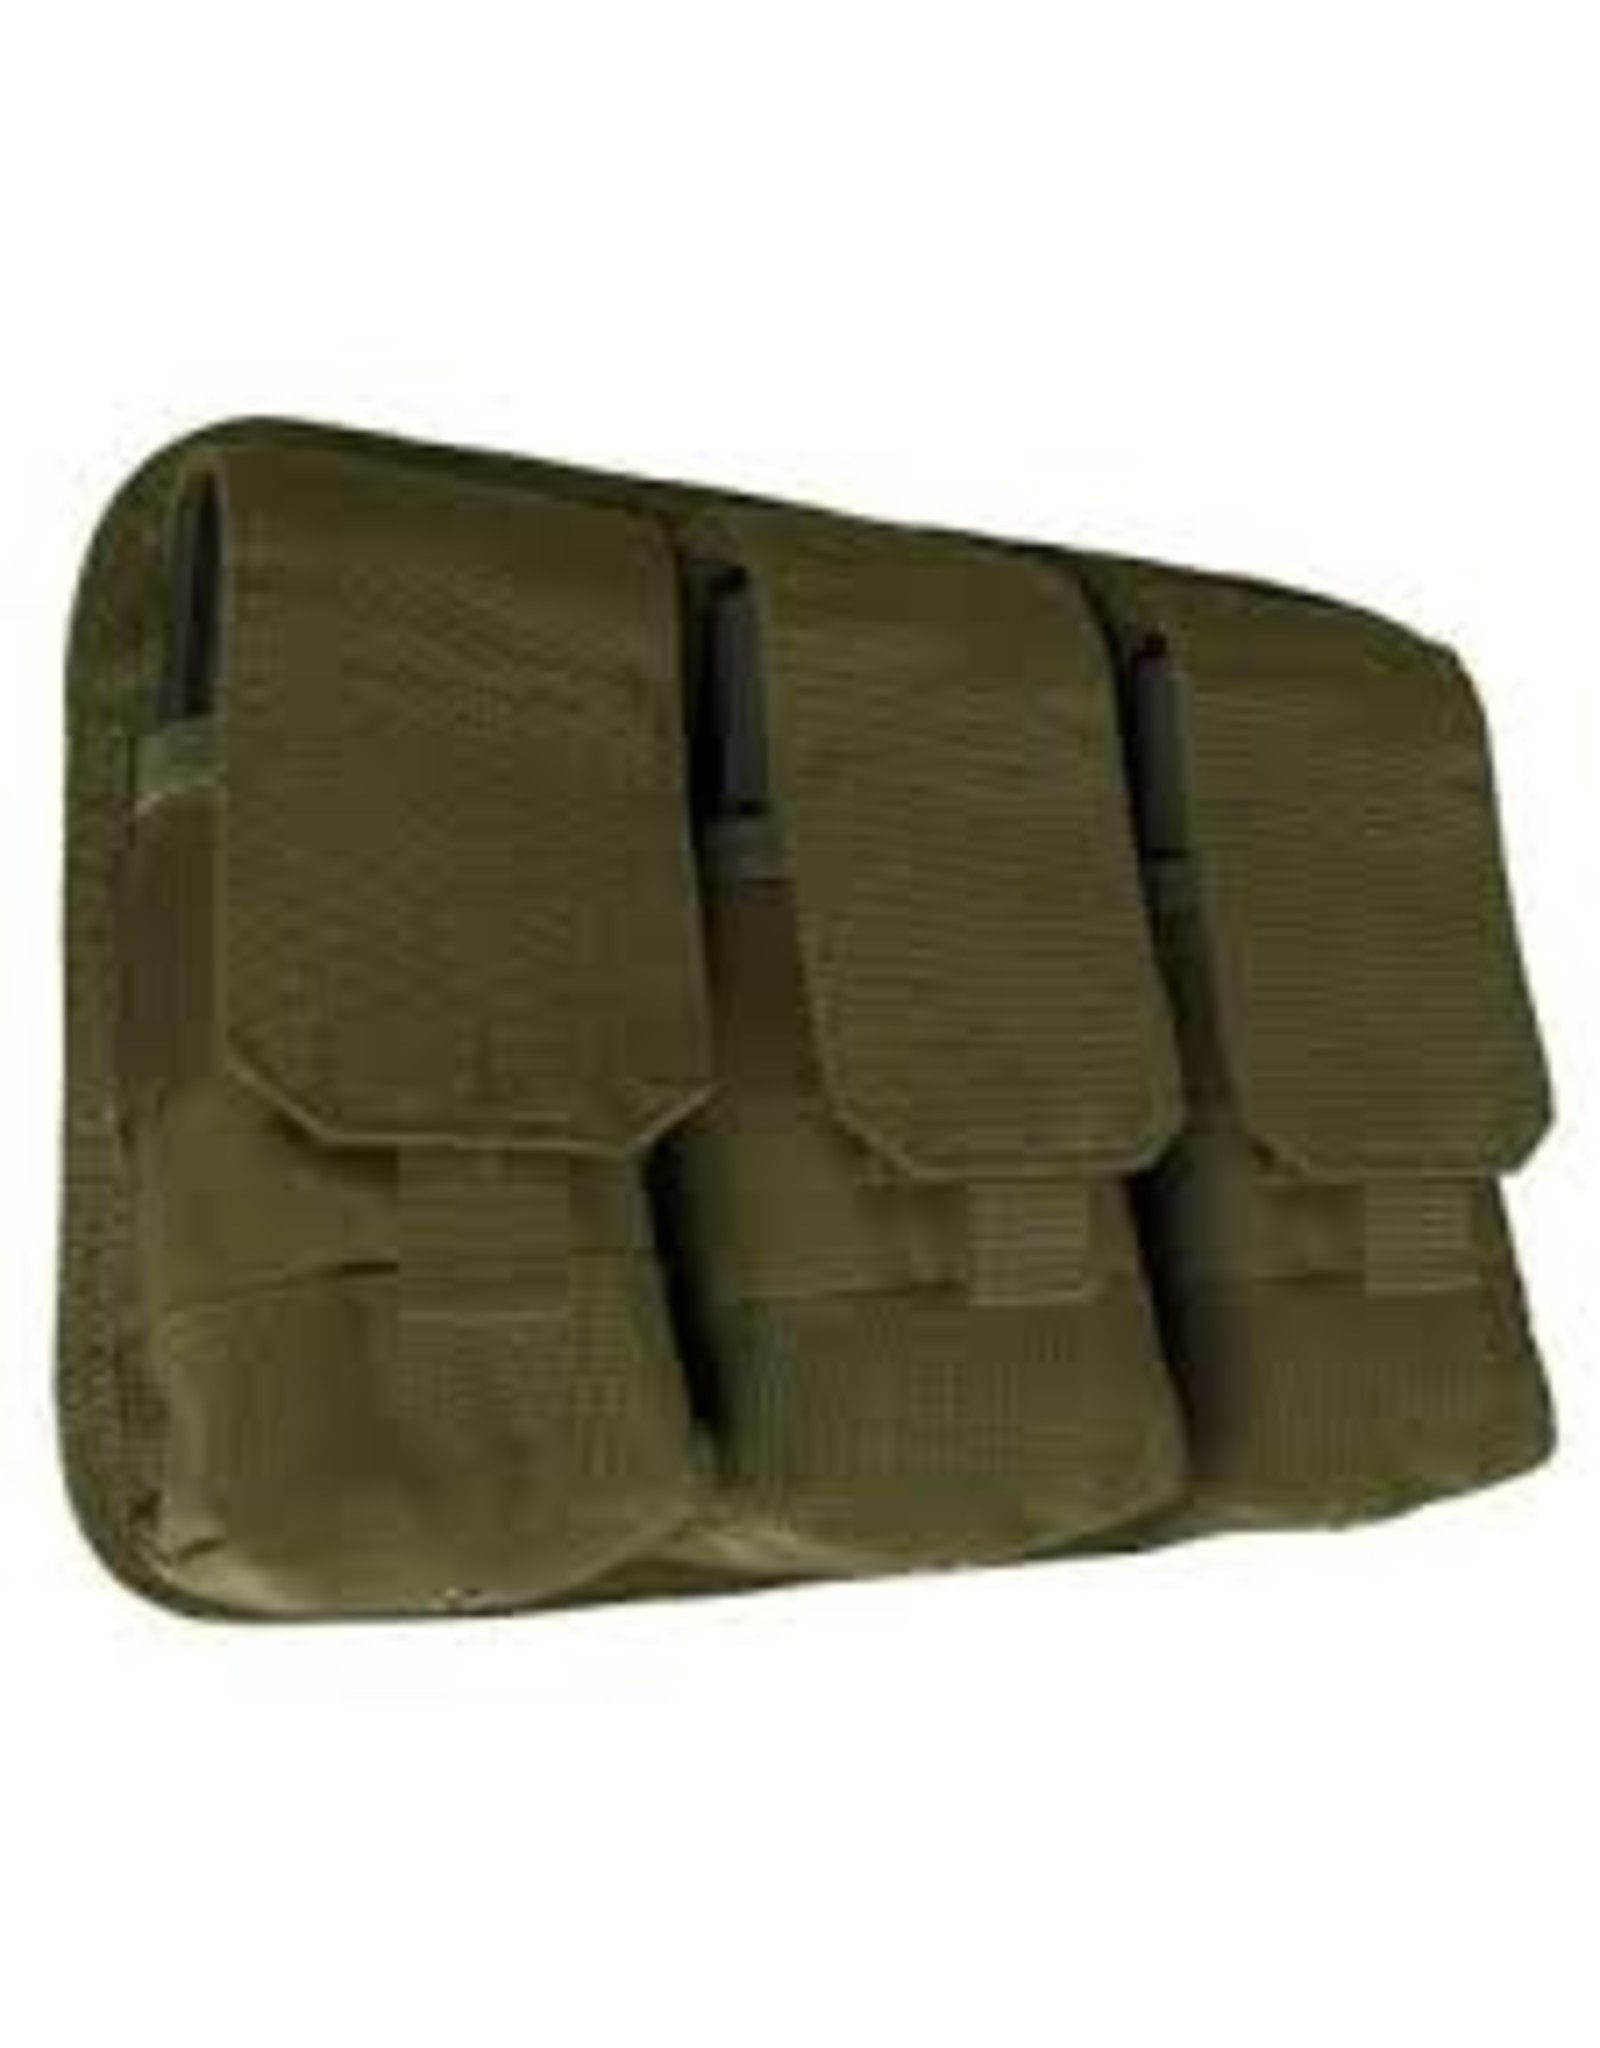 ROTHCO UNIVERSAL TRIPLE MAG POUCH